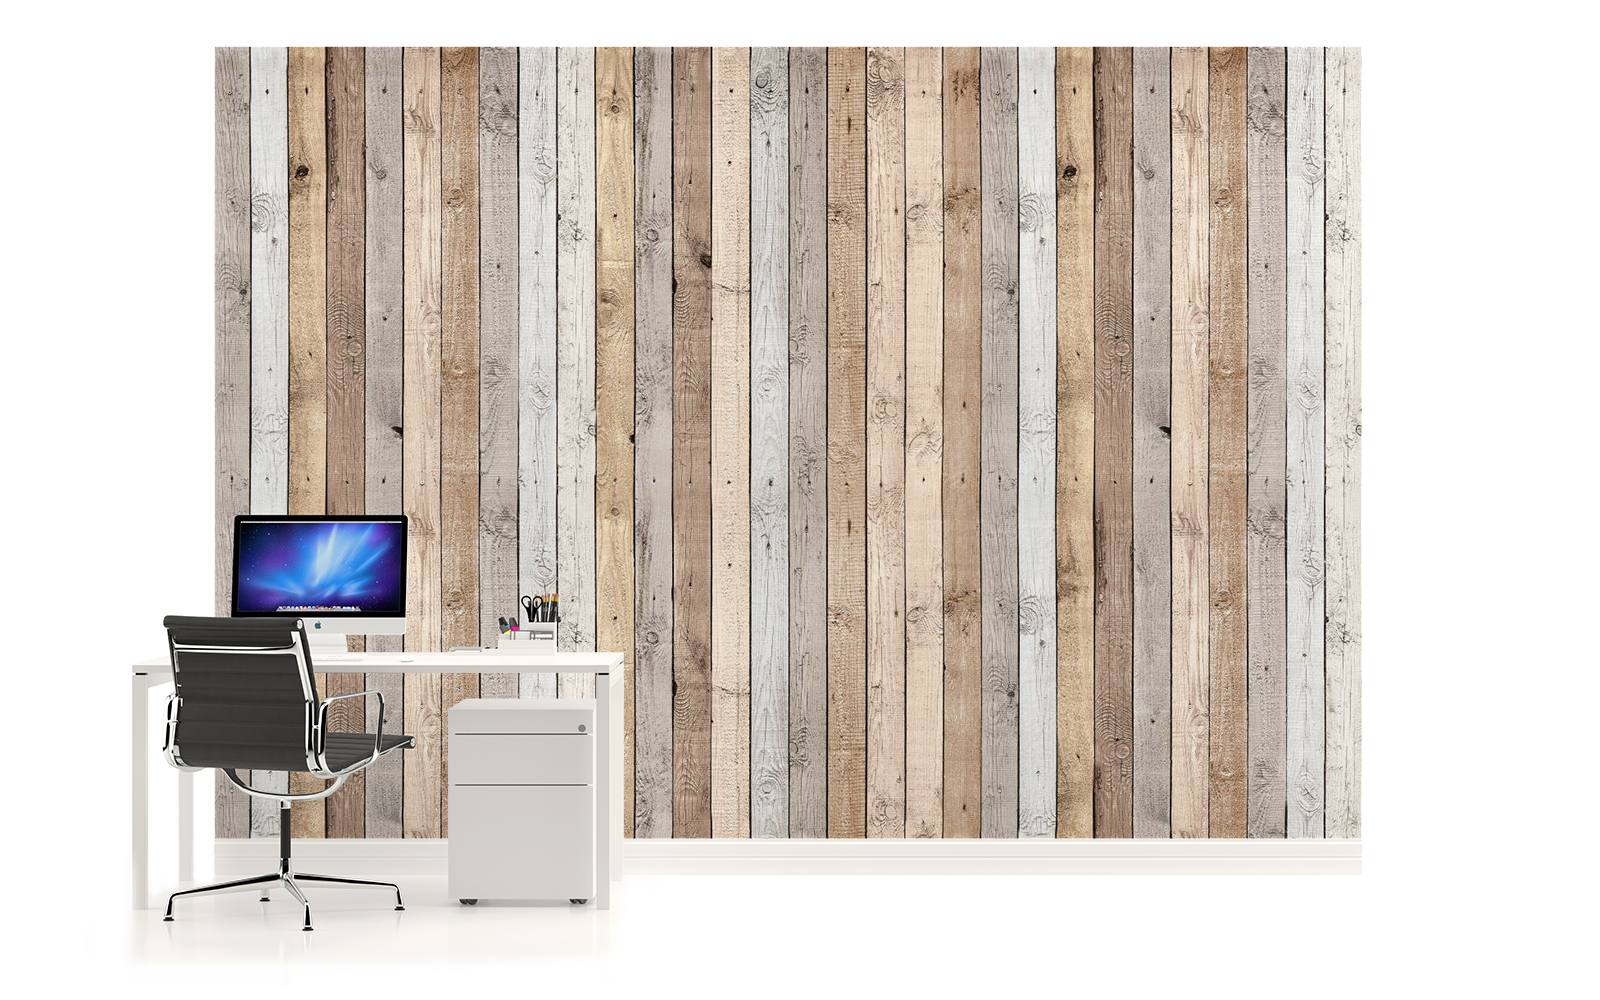 About Wood Planks Texture Photo Wallpaper Wall Mural Room Decor 1036ve